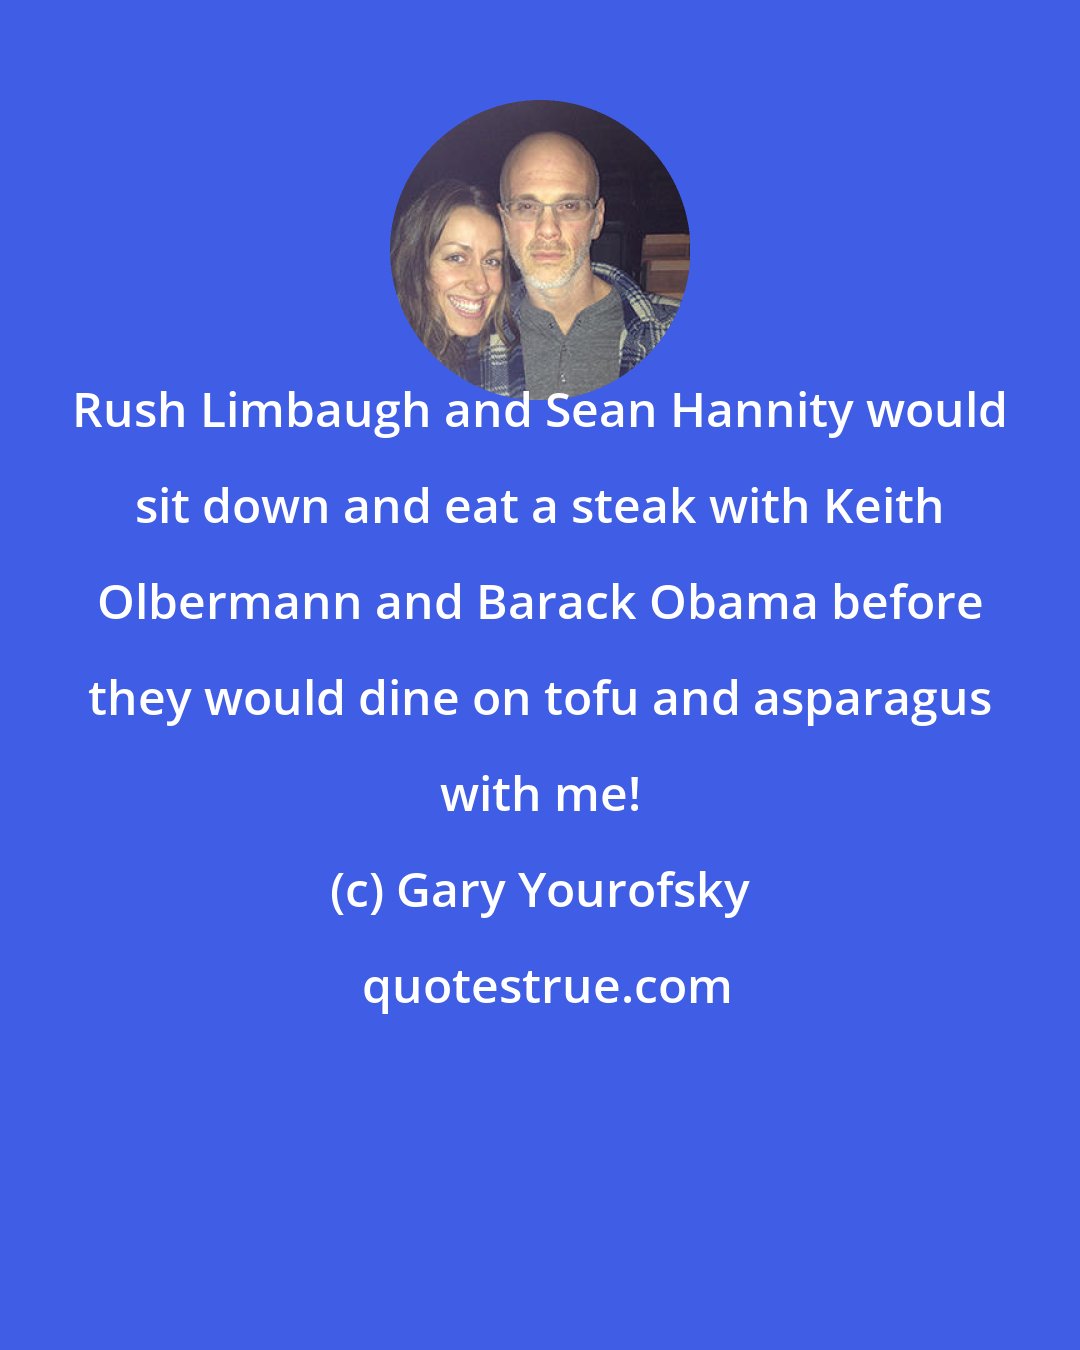 Gary Yourofsky: Rush Limbaugh and Sean Hannity would sit down and eat a steak with Keith Olbermann and Barack Obama before they would dine on tofu and asparagus with me!